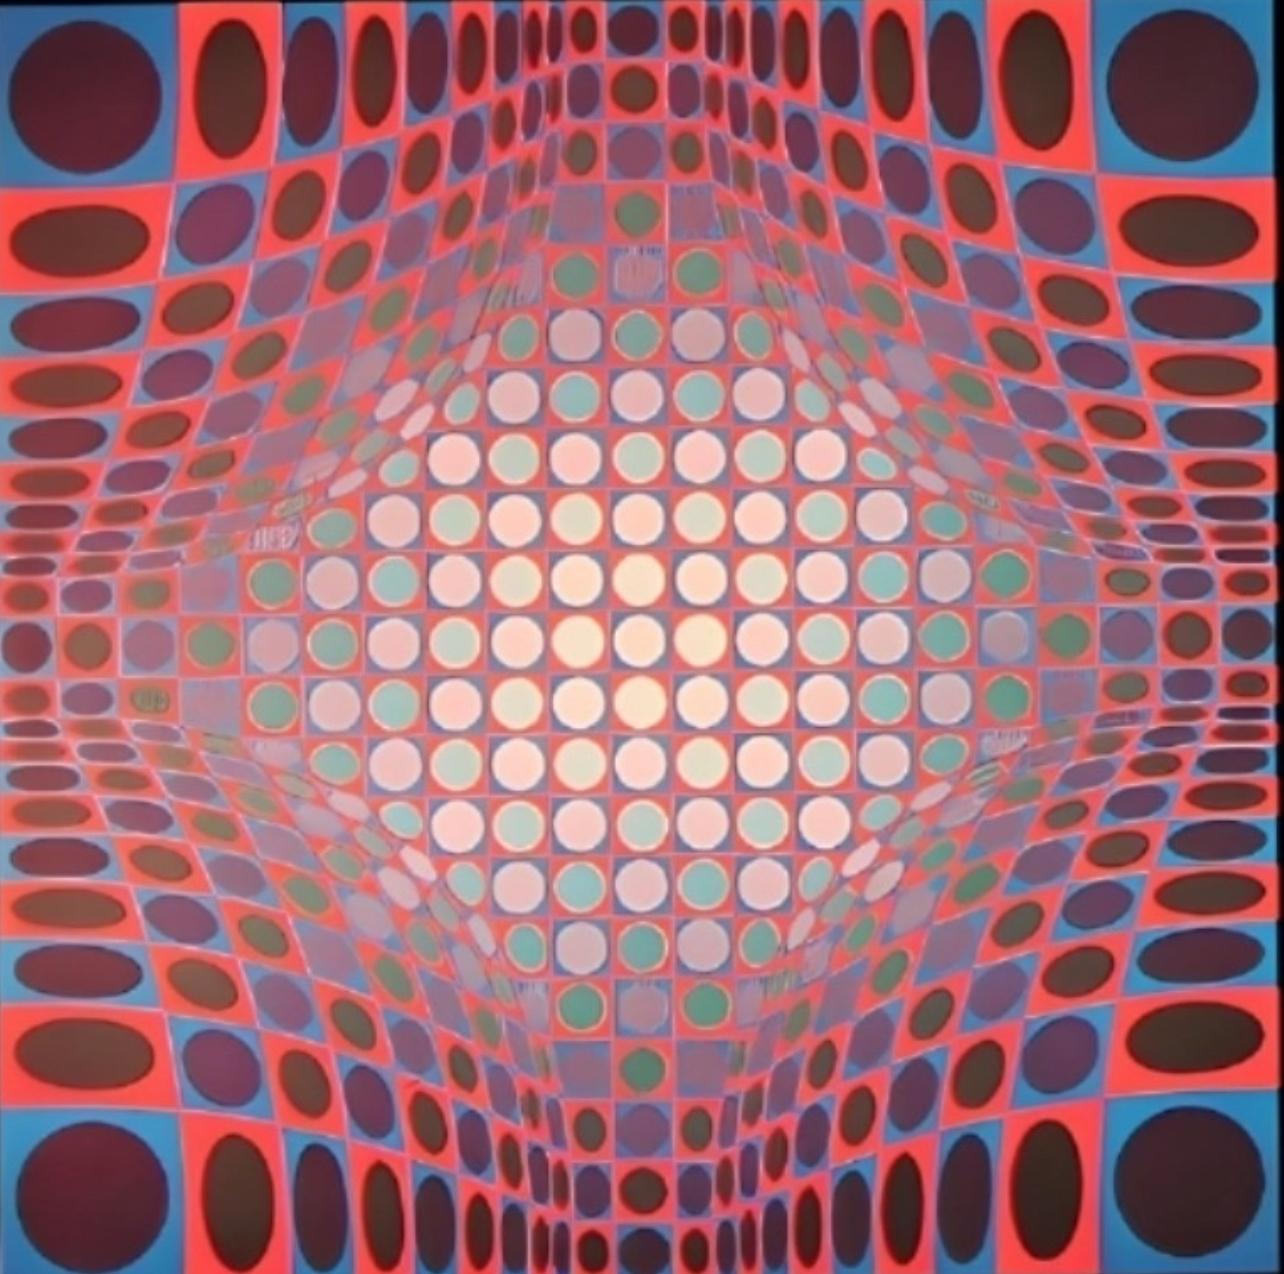 Vasarely, Composition, VEGA (after) - Op Art Print by Victor Vasarely